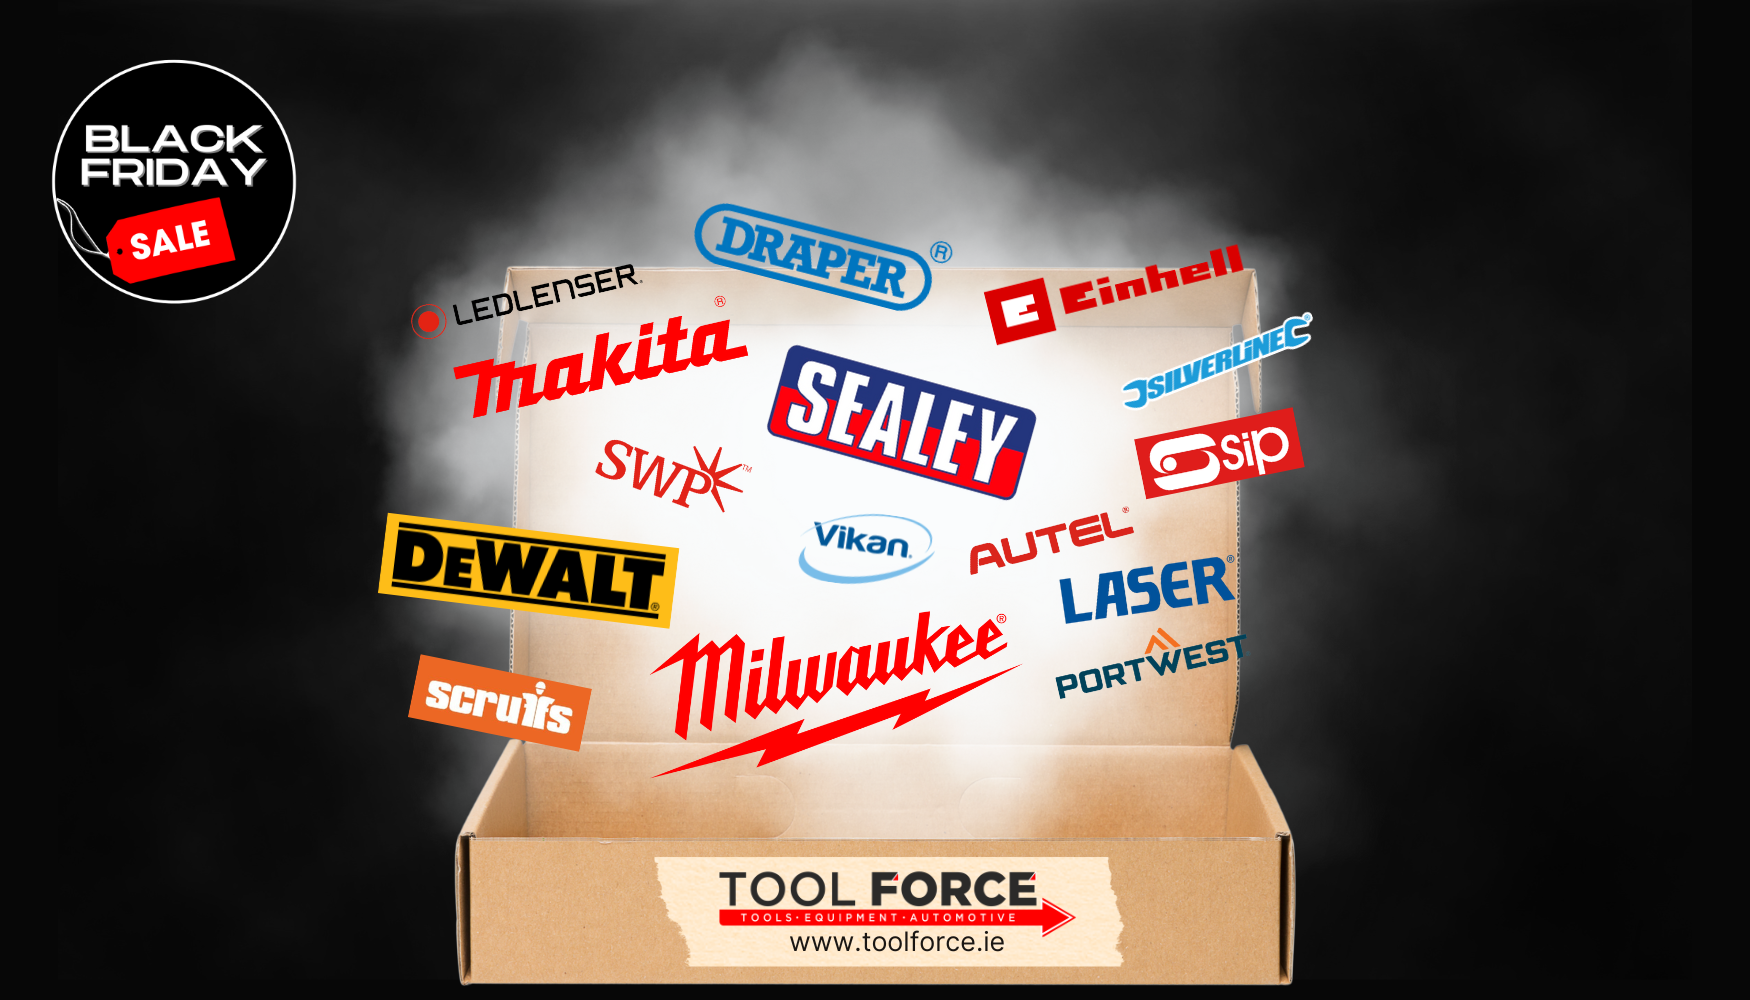 Cardboard box with Toolforce Branded tape, with brand logos of Milwaukee, Scruffs, DeWalt, SWP, Makita, Ledlenser, Draper, Sealey, Vikan, Autel, Later, SIP, Silverline and Einhell flying out of it, with steam rising out.